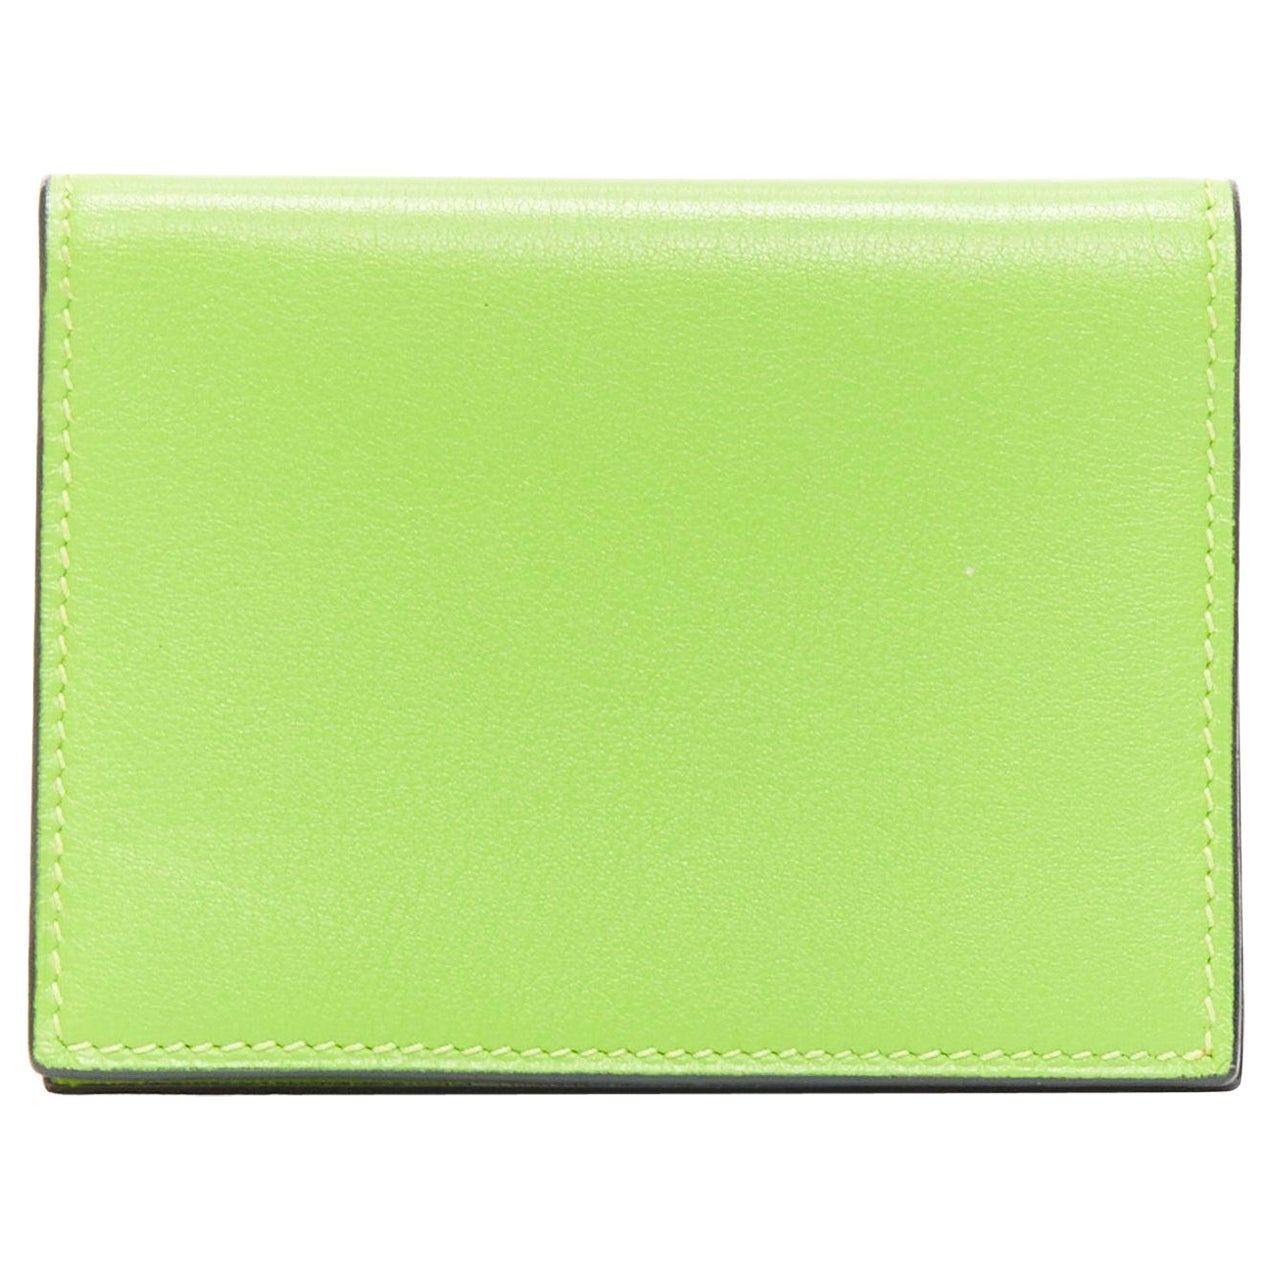 HERMES neon green smooth leather silver hardware bifold cardholder For Sale